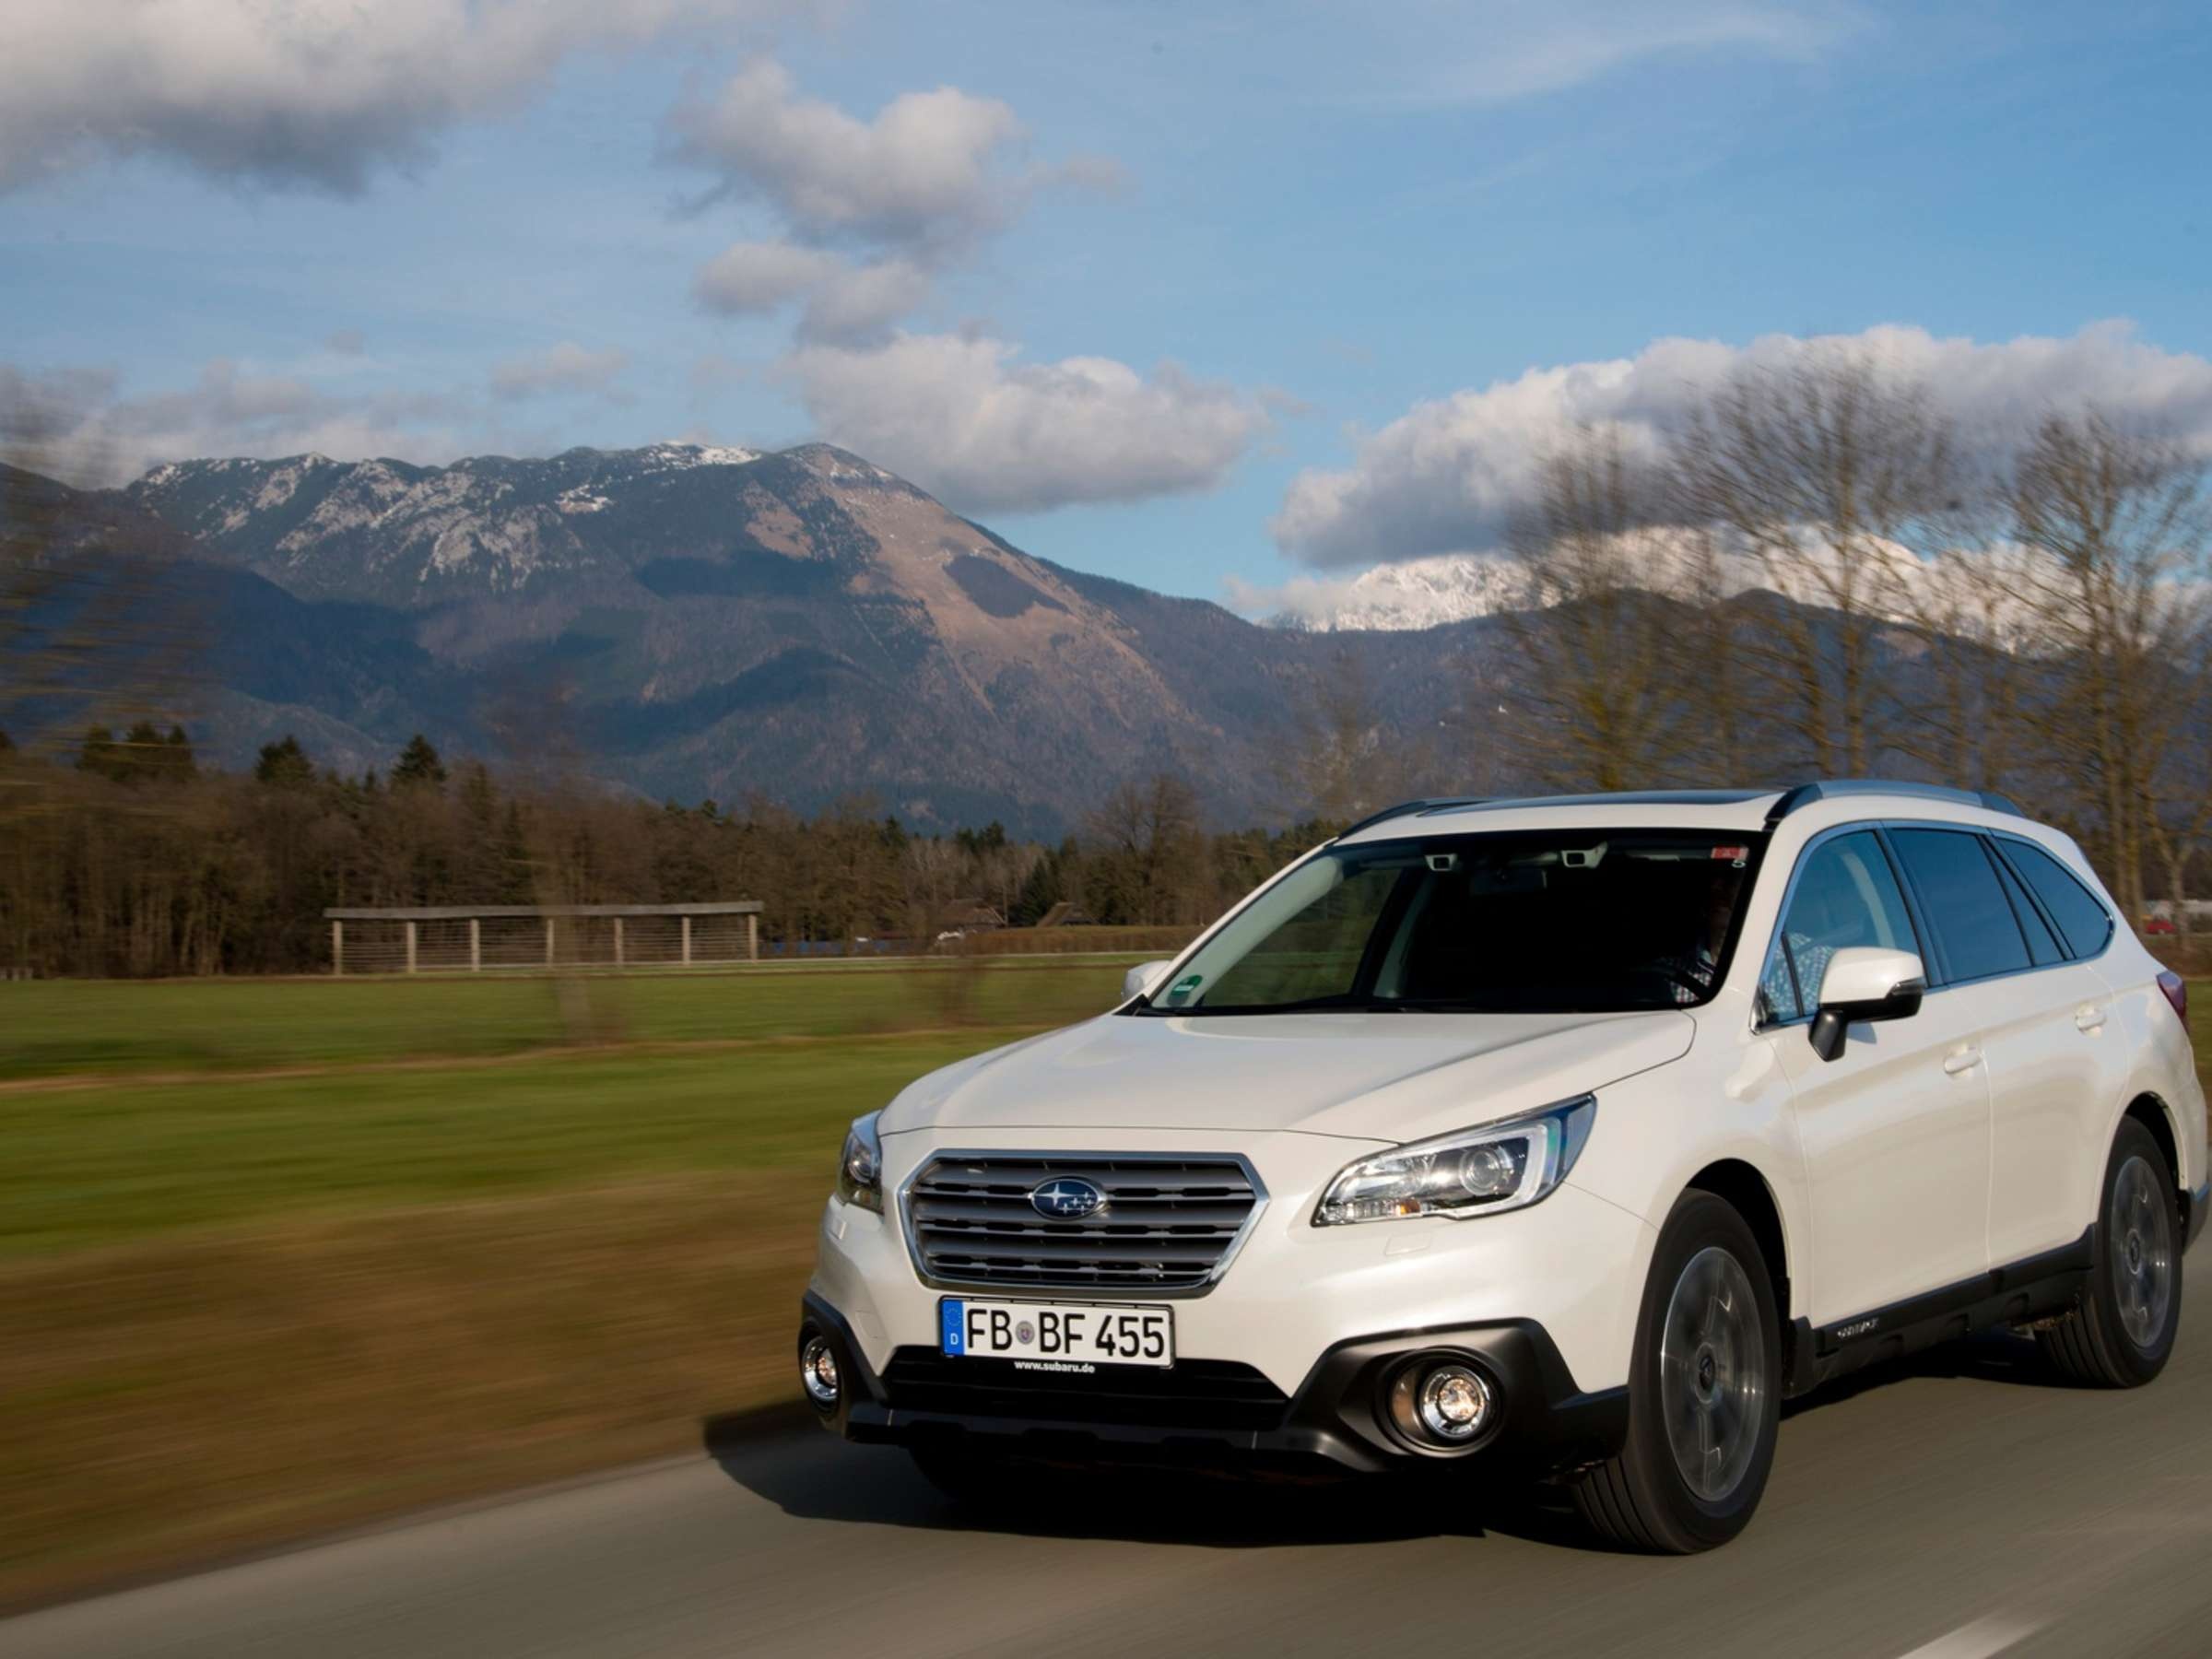 Subaru Outback with Eyesight, Advanced safety features, Reliable performance, Autofilou, 2400x1800 HD Desktop